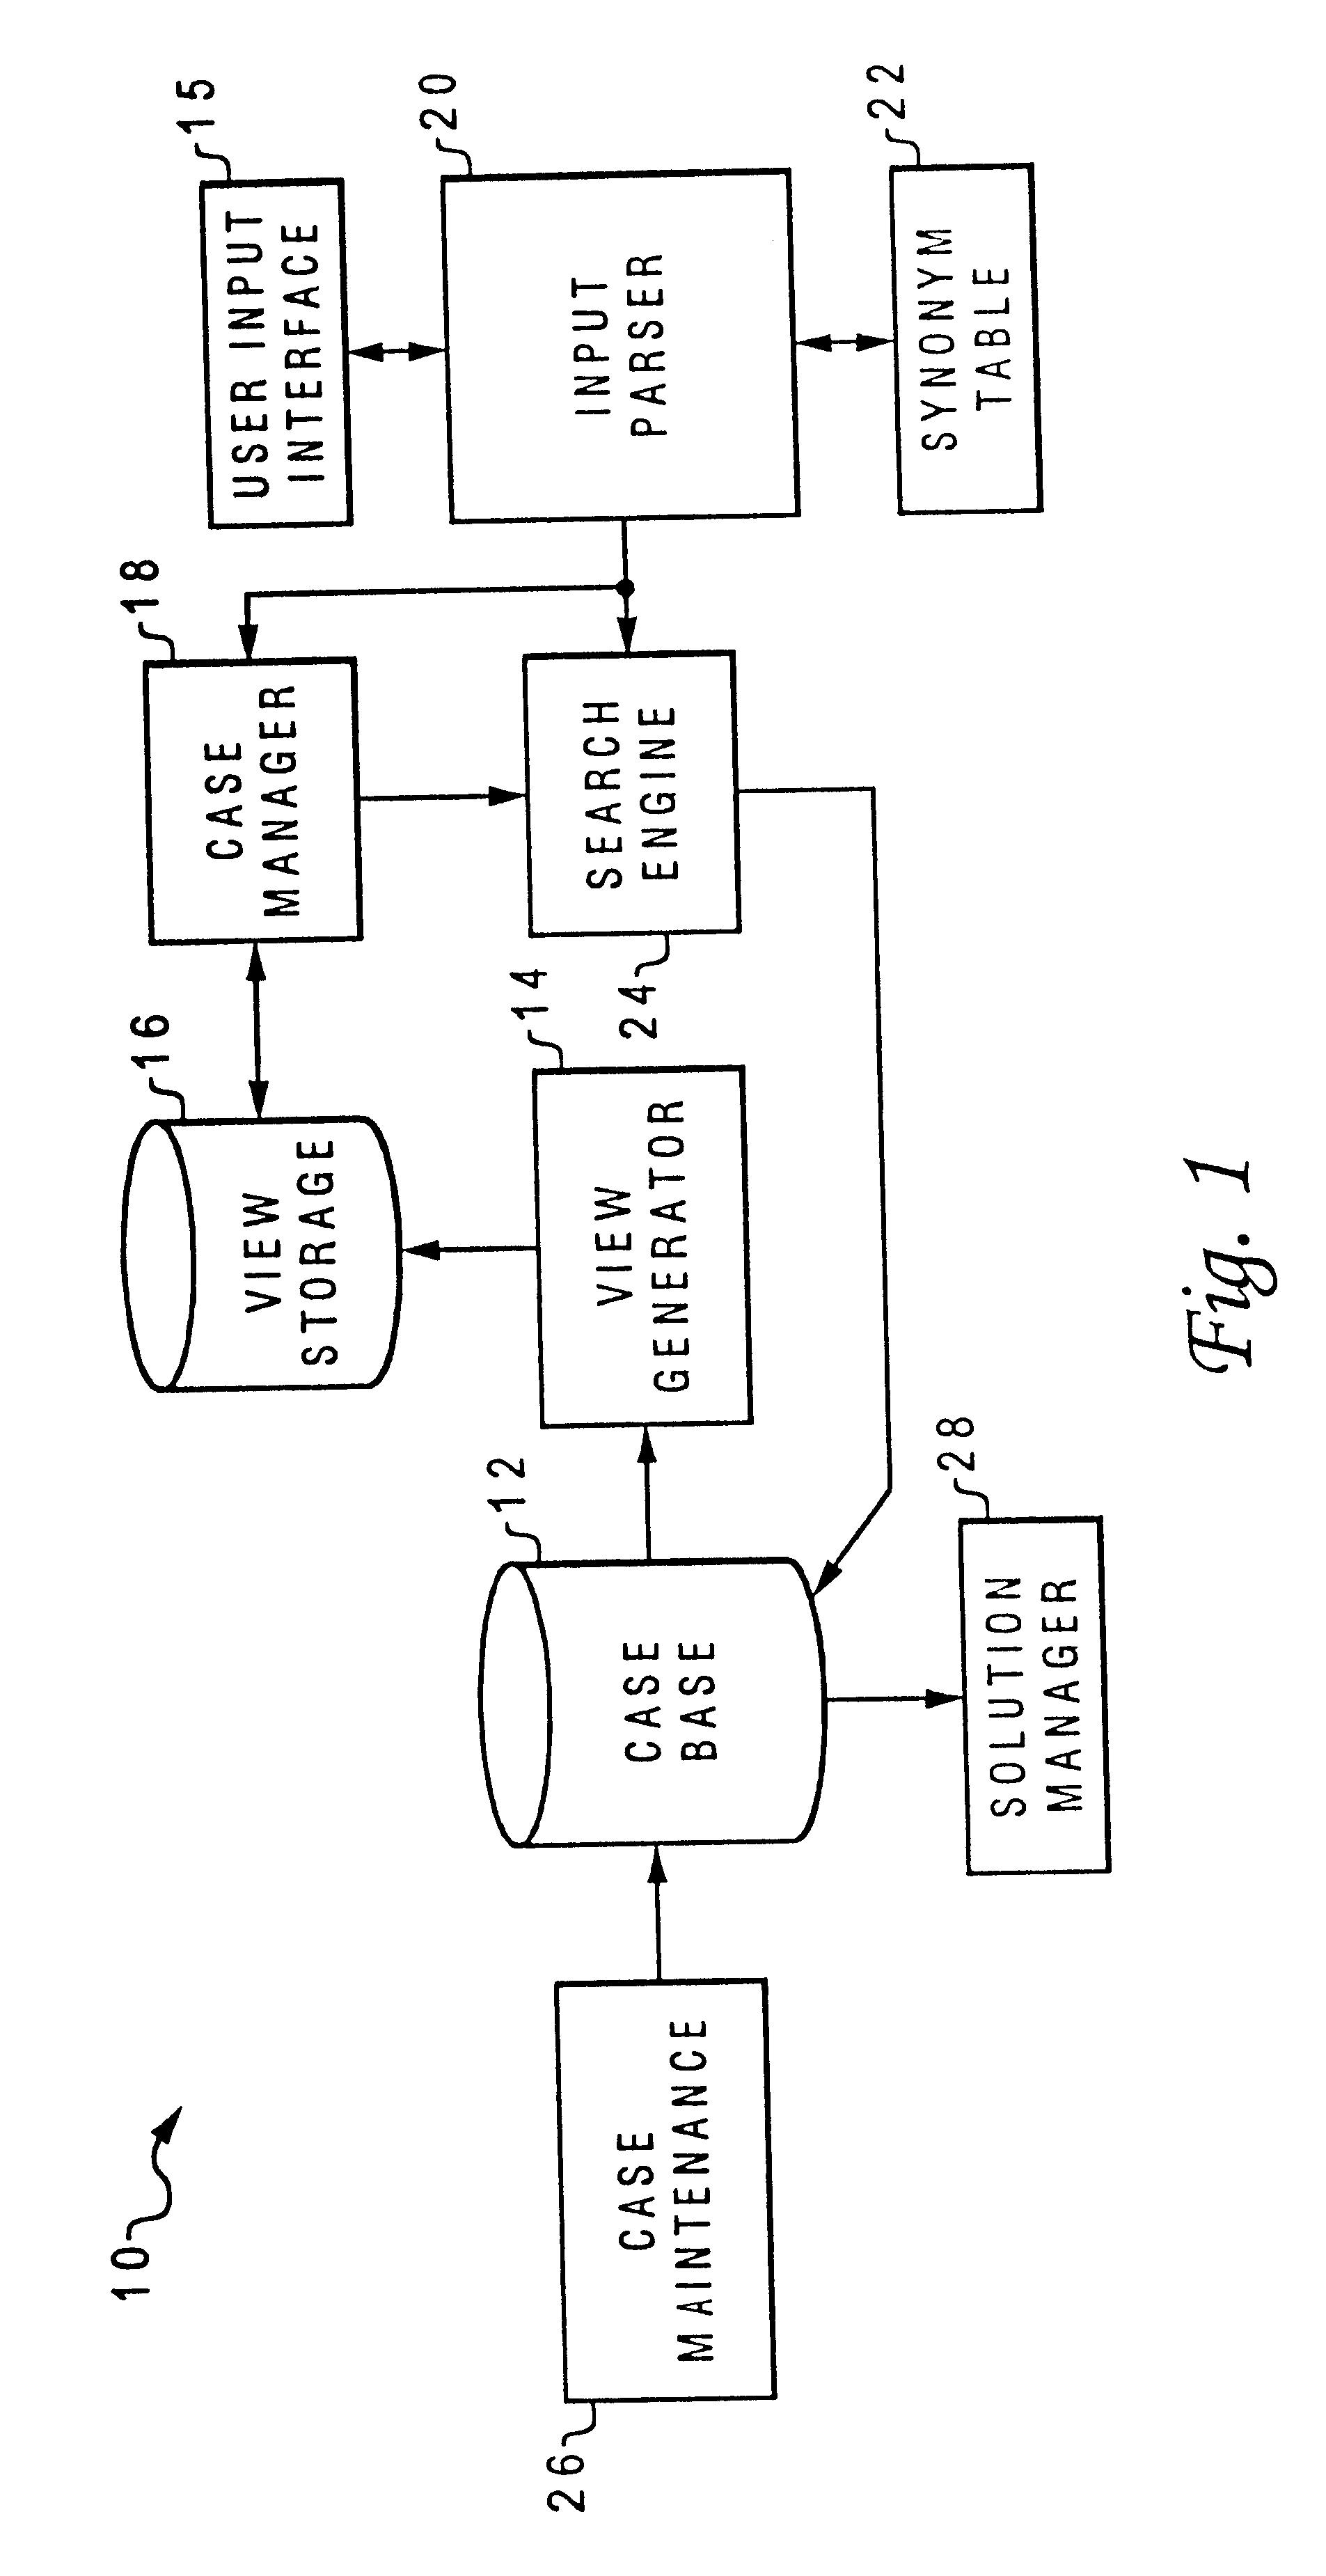 Case-based reasoning system and method with a search engine that compares the input tokens with view tokens for matching cases within view